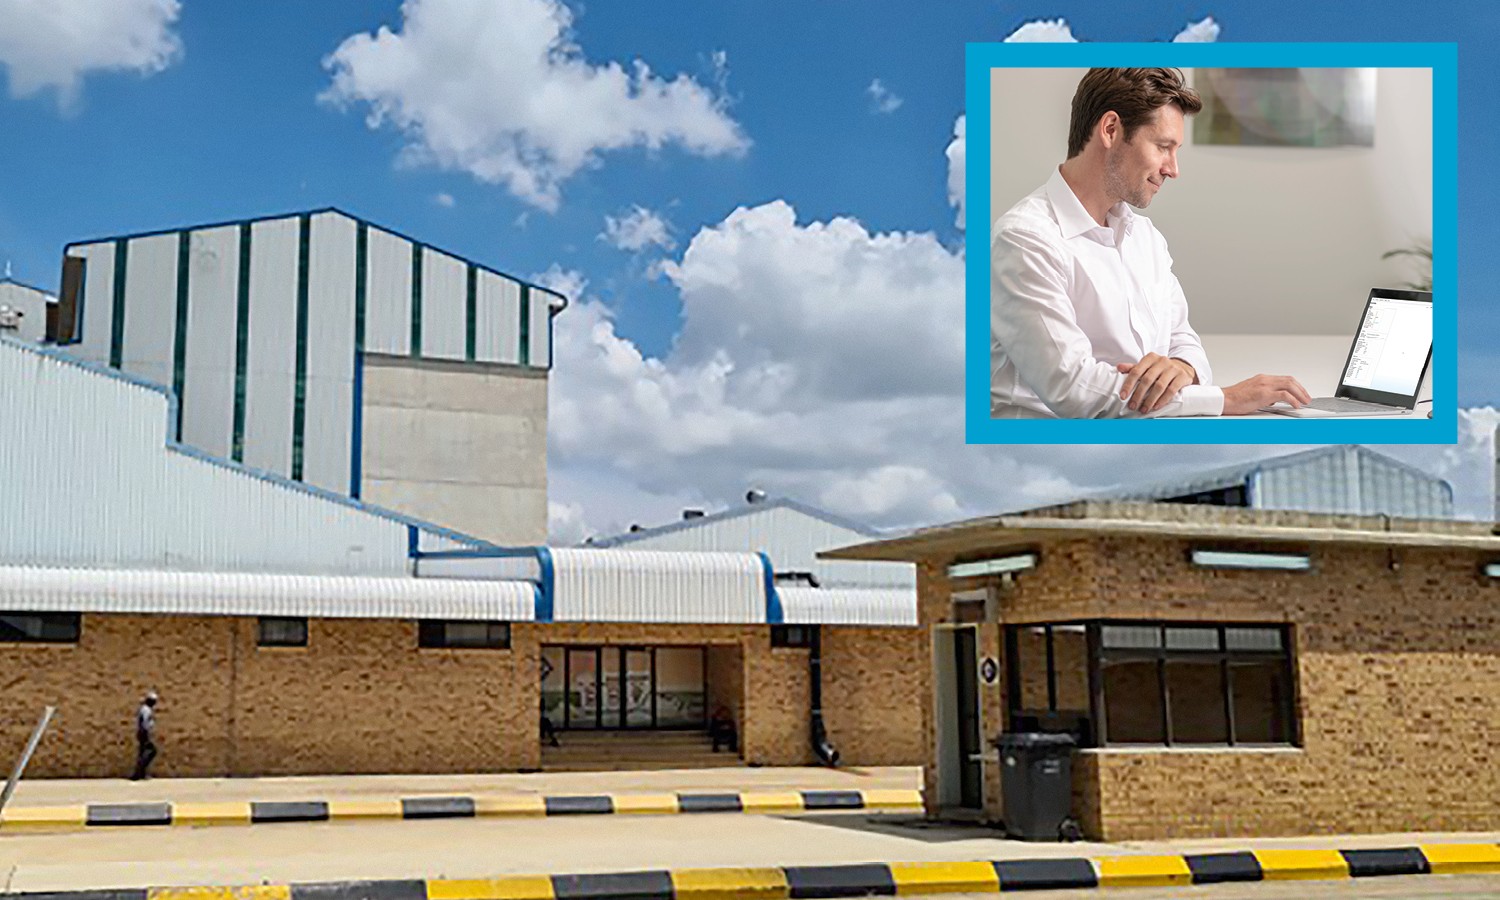 At this food manufacturer, CLIQ® access control plays a key role improving security and product safety